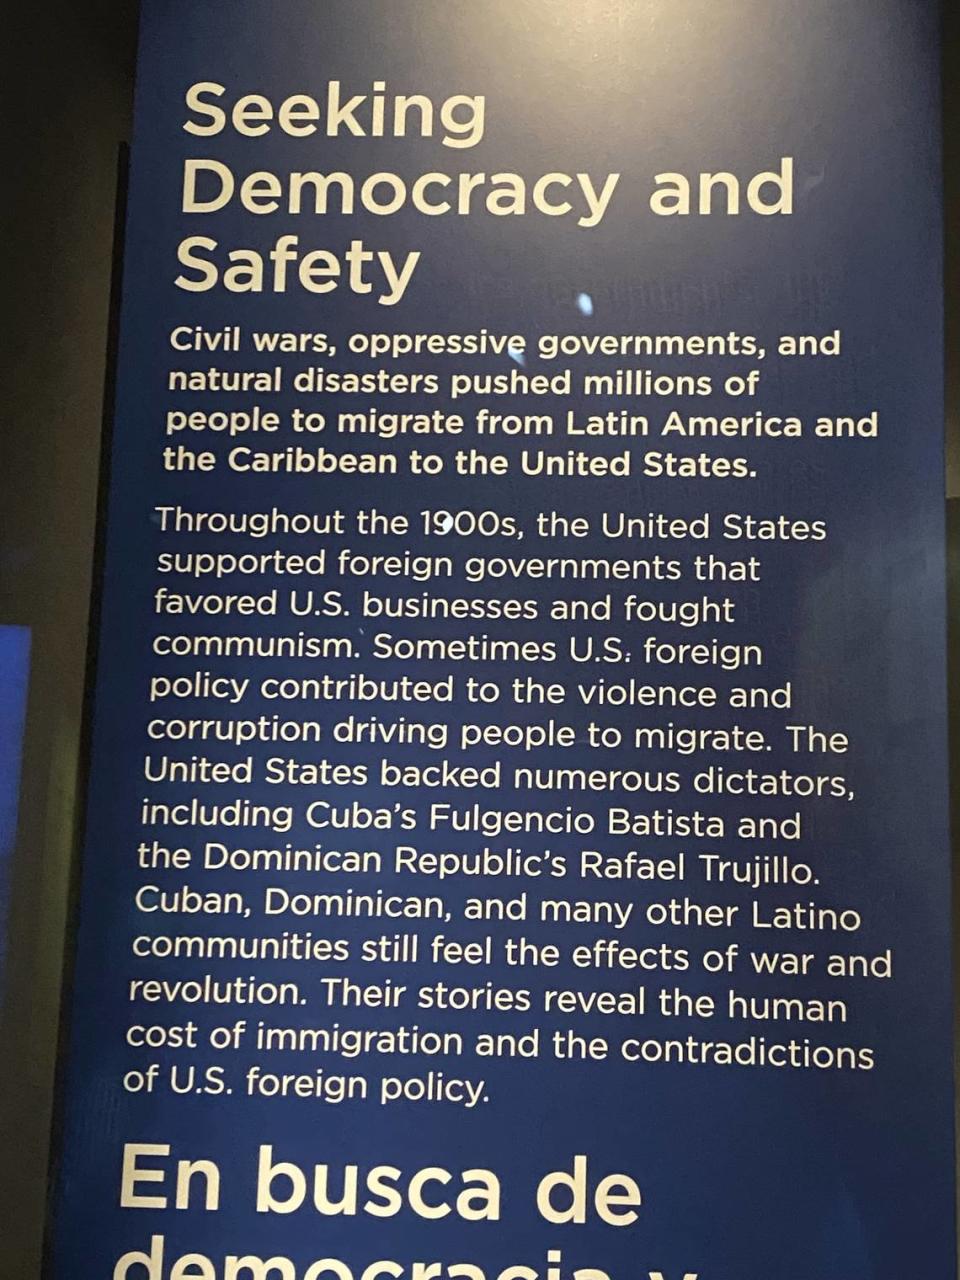 The ¡Presente!: A Latino History of the United States gallery in Washington includes information about U.S. intervention in Latin America, including the government’s support for brutal authoritarian regimes.